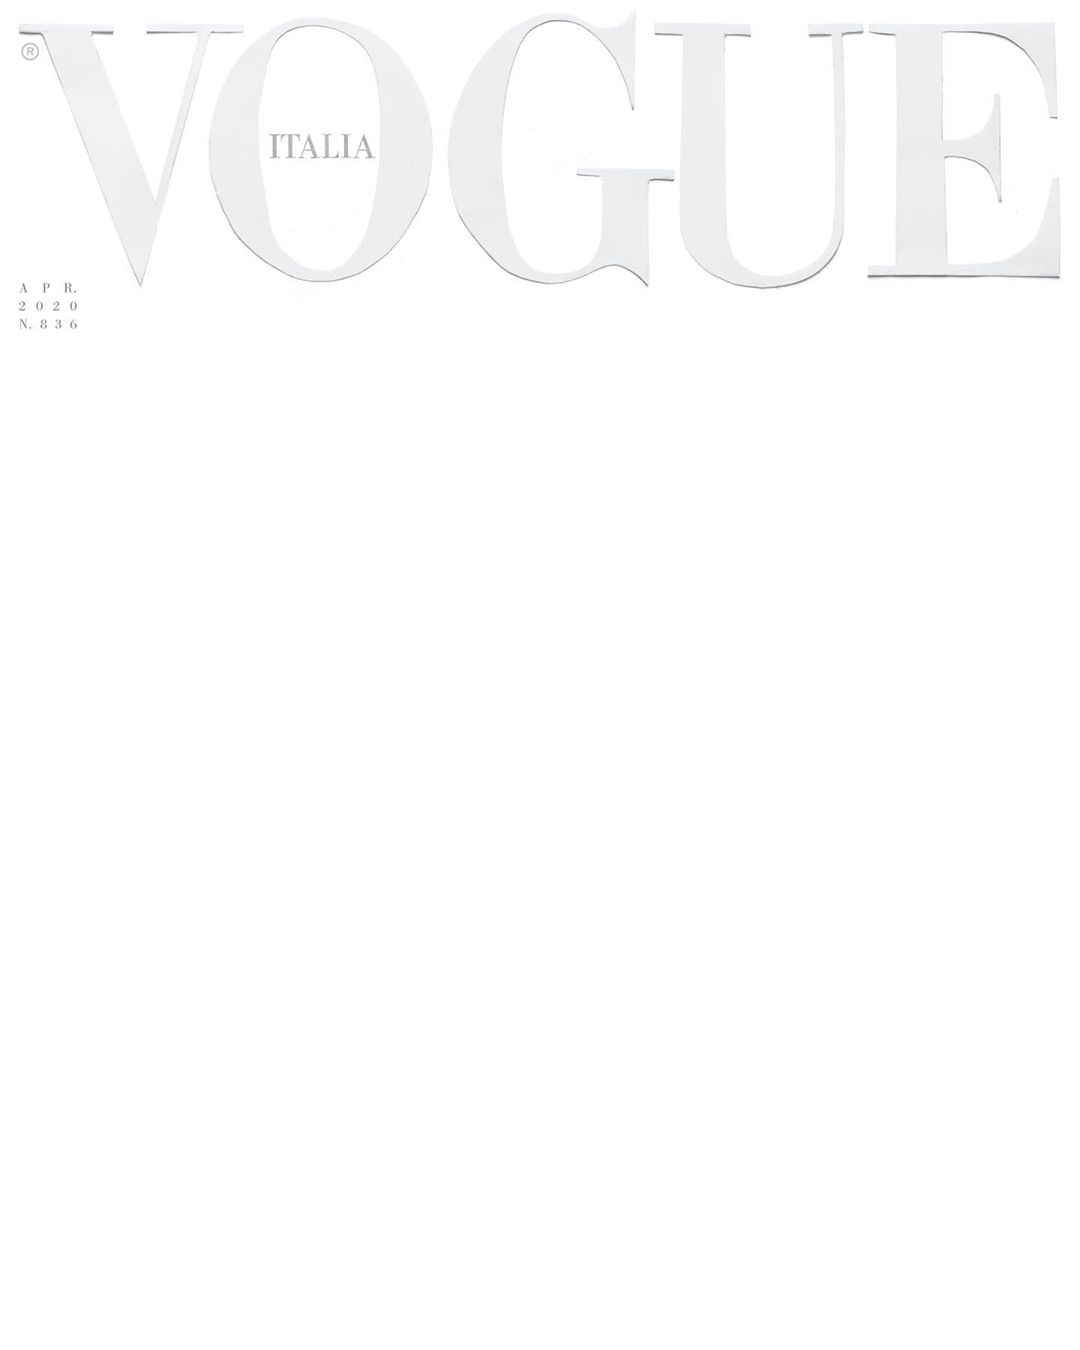 COVID-19: Vogue Italia makes a powerful statement with blank white cover